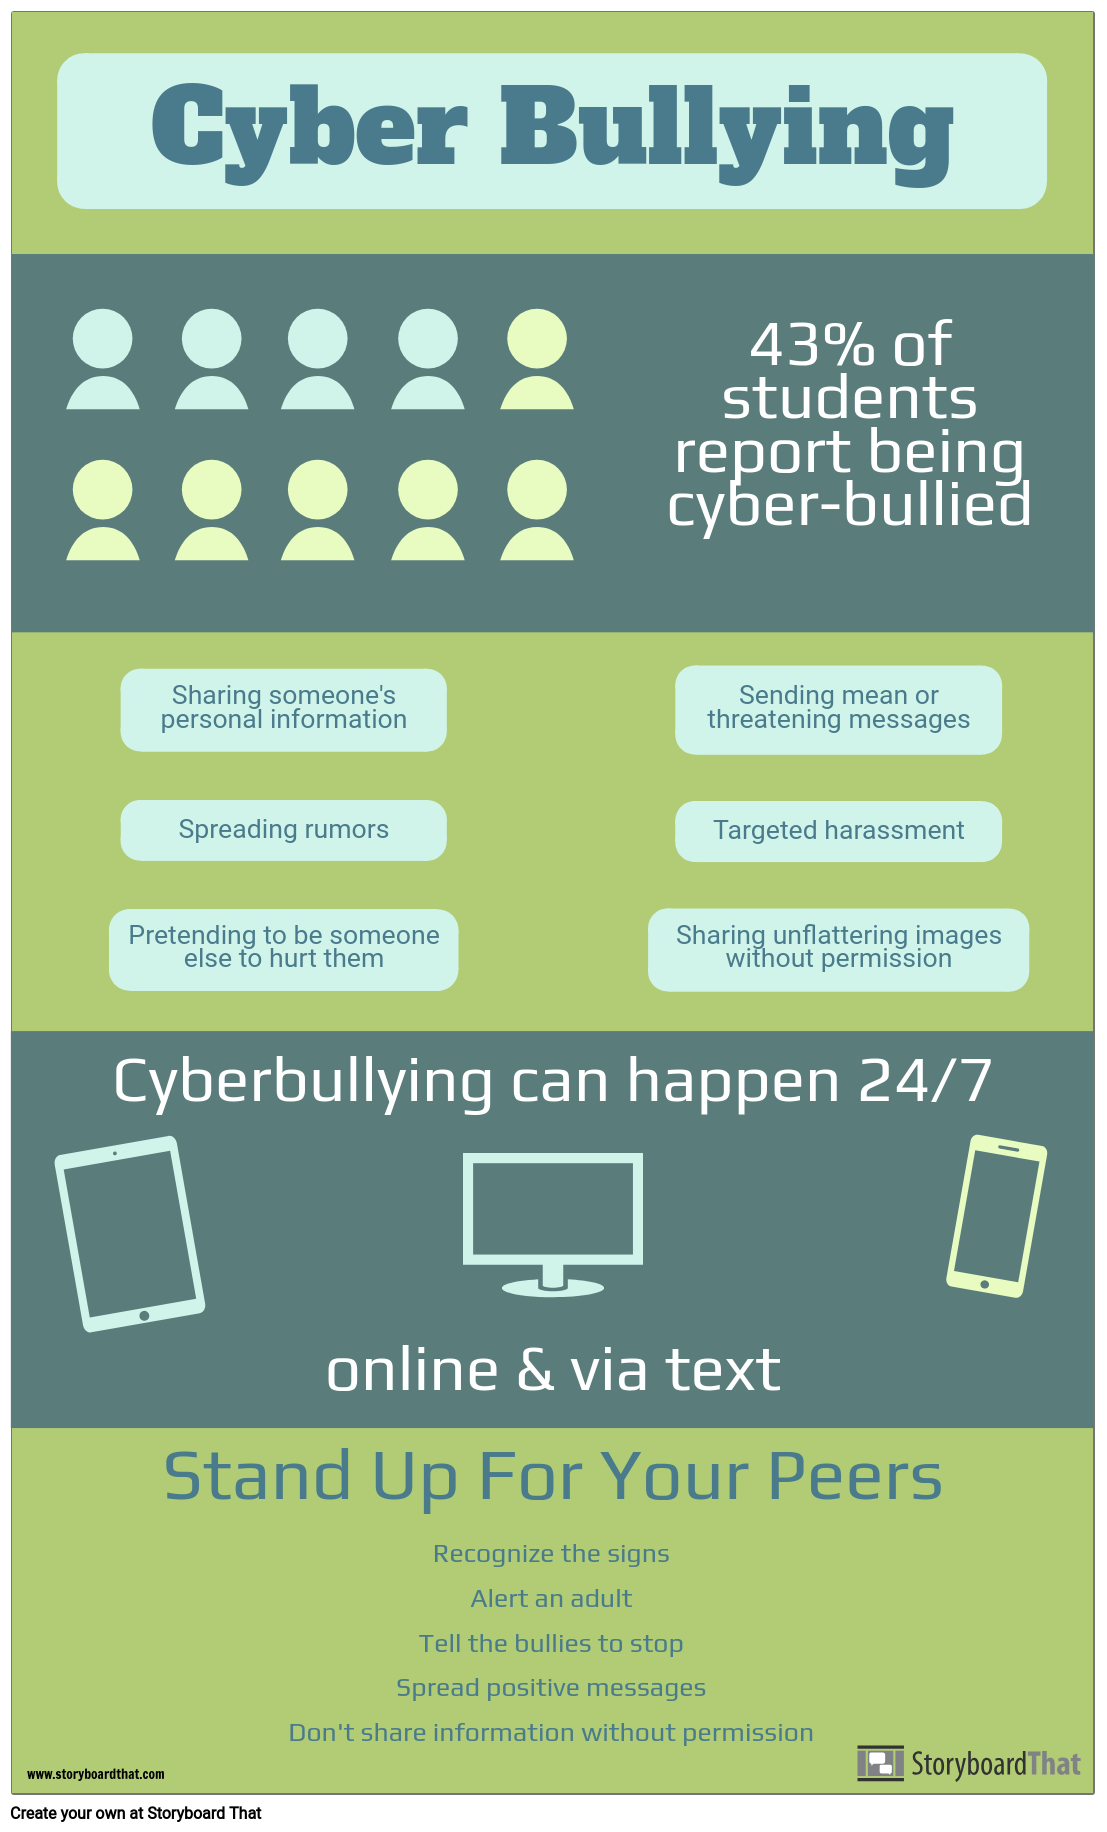 research report about cyberbullying